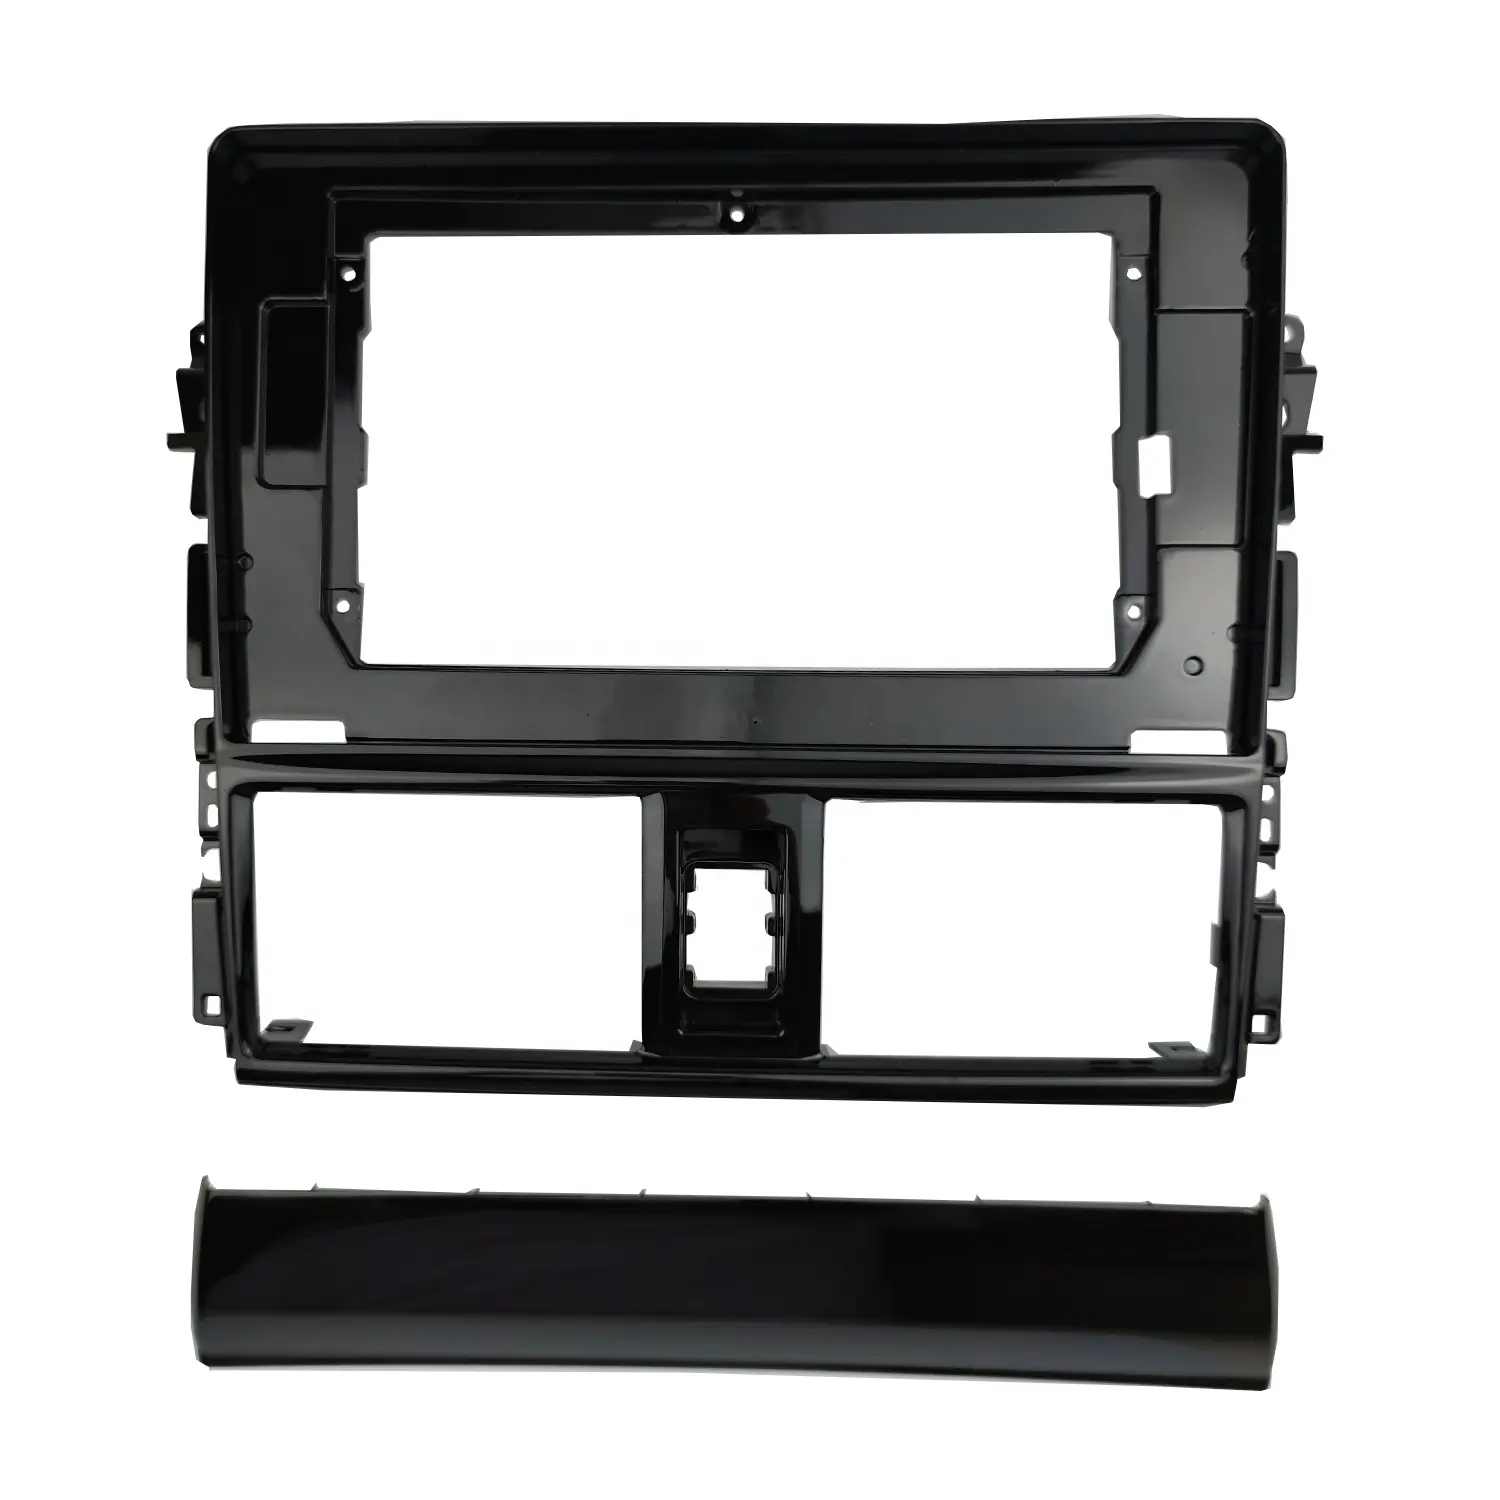 10.1 INCH Radio Frame for TOYOTA Vios Yaris 2013-2016 Stereo DVD Player Install Surround Trim Panel Kit Face Plate Audio Fascia